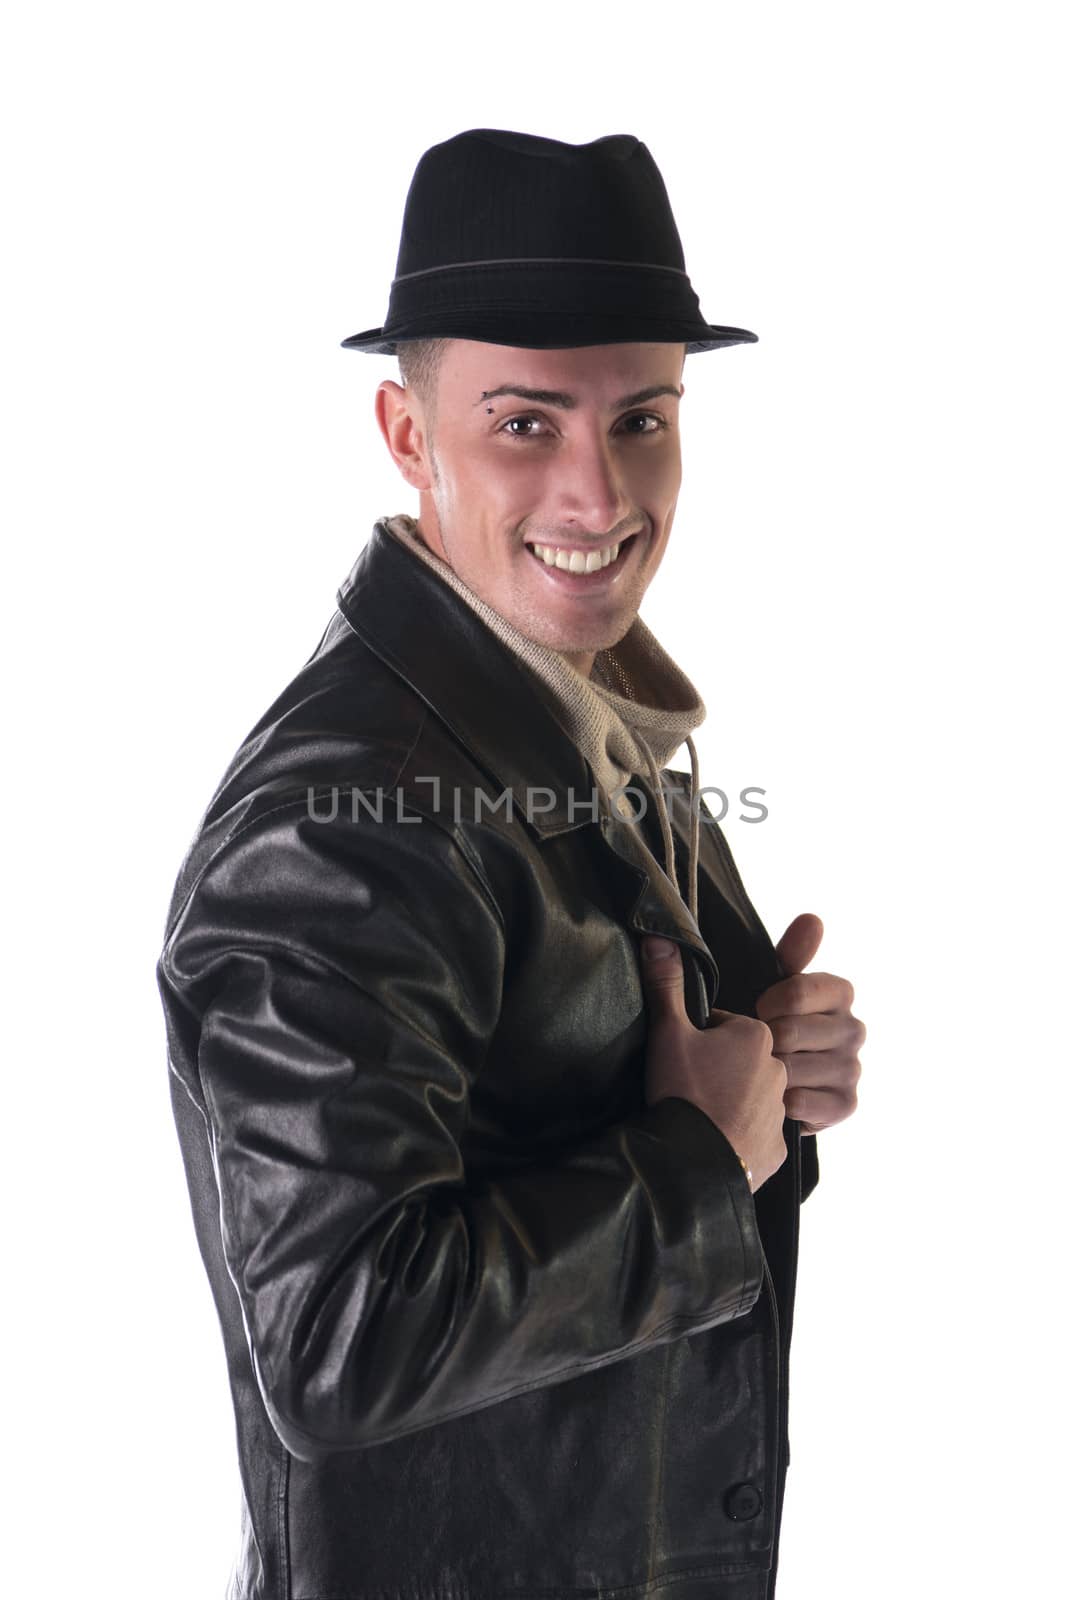 Smiling young man with black fedora hat and leather coat, isolated on white